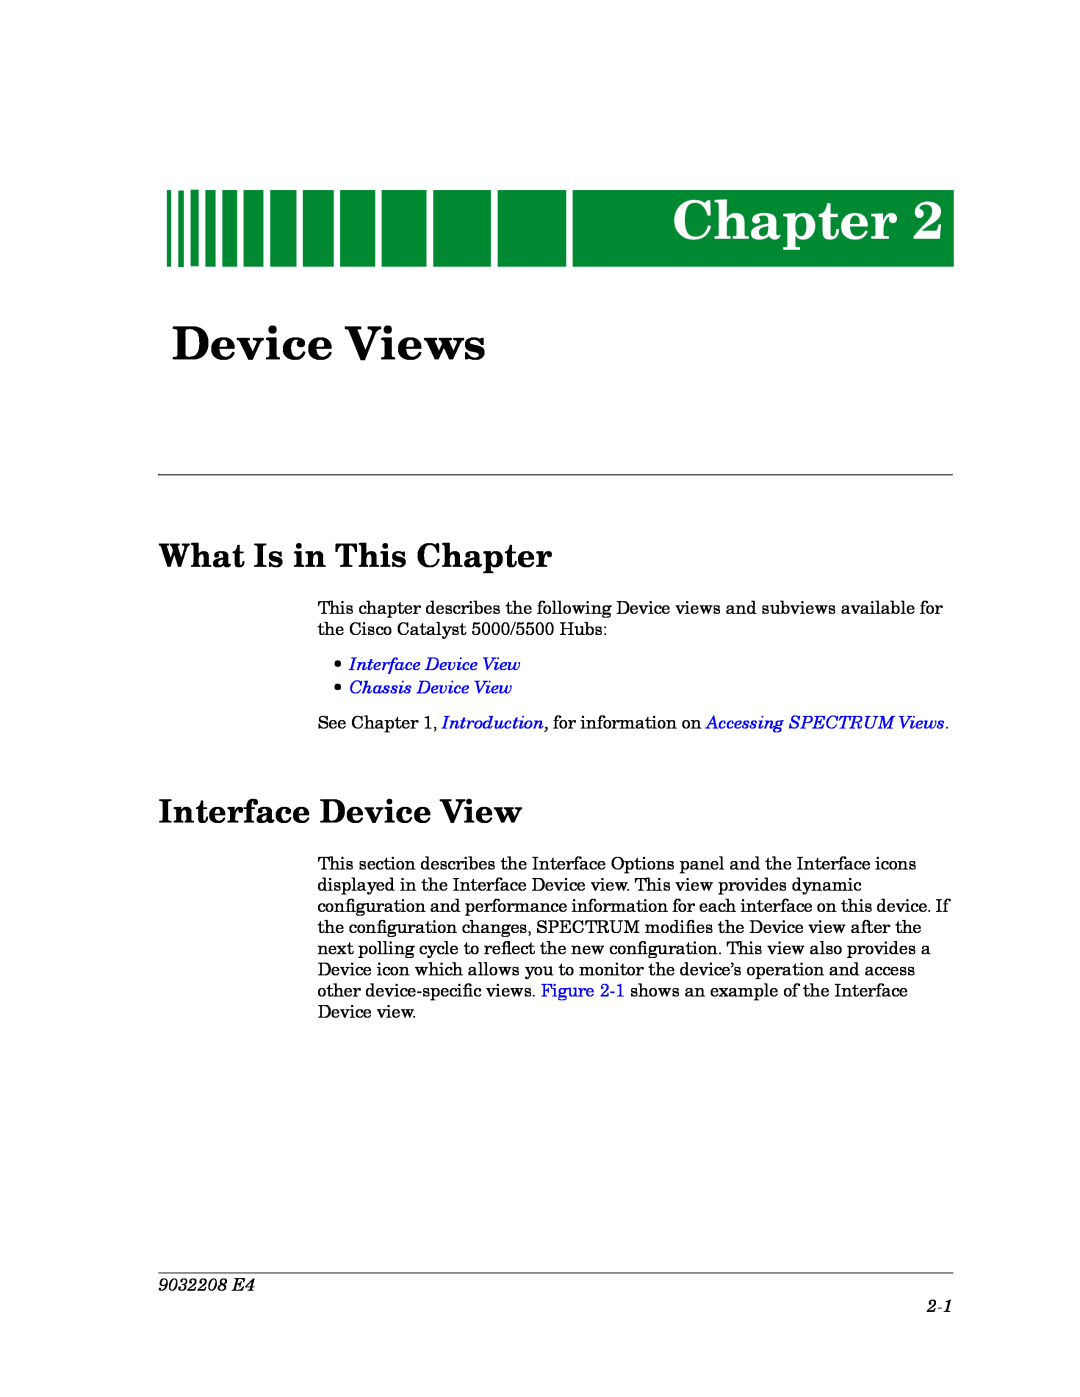 Cabletron Systems 5000, 5500 Device Views, ¥ Interface Device View ¥ Chassis Device View, 9032208 E4 2-1, Chapter 